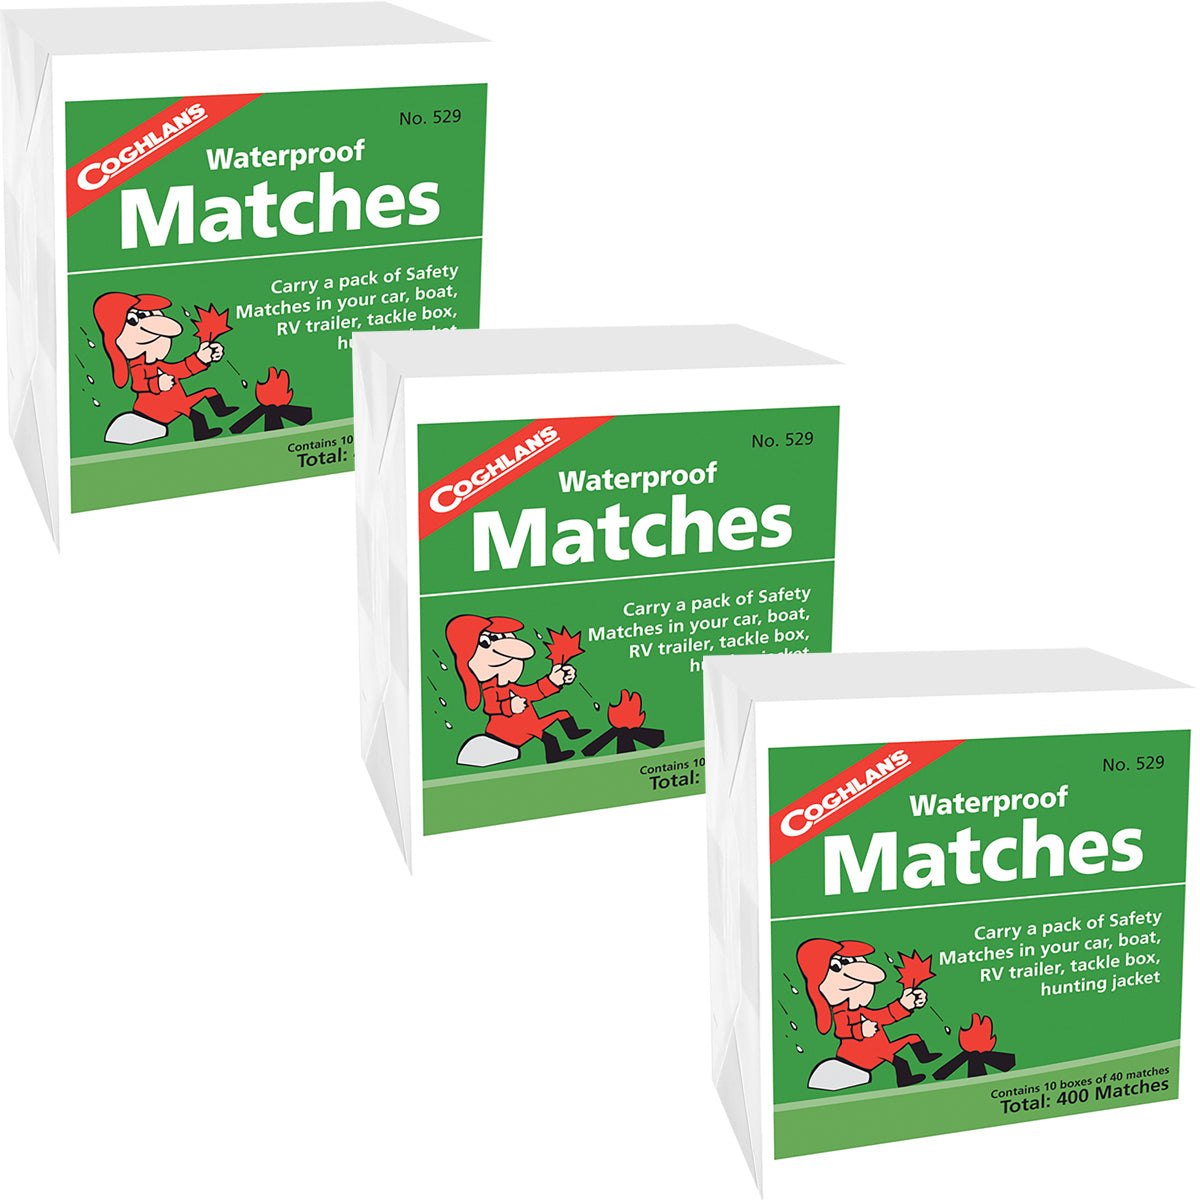 Coghlan's Waterproof Matches (30 Boxes), 1,200 Total Matches, Safety w/ Striker Coghlan's